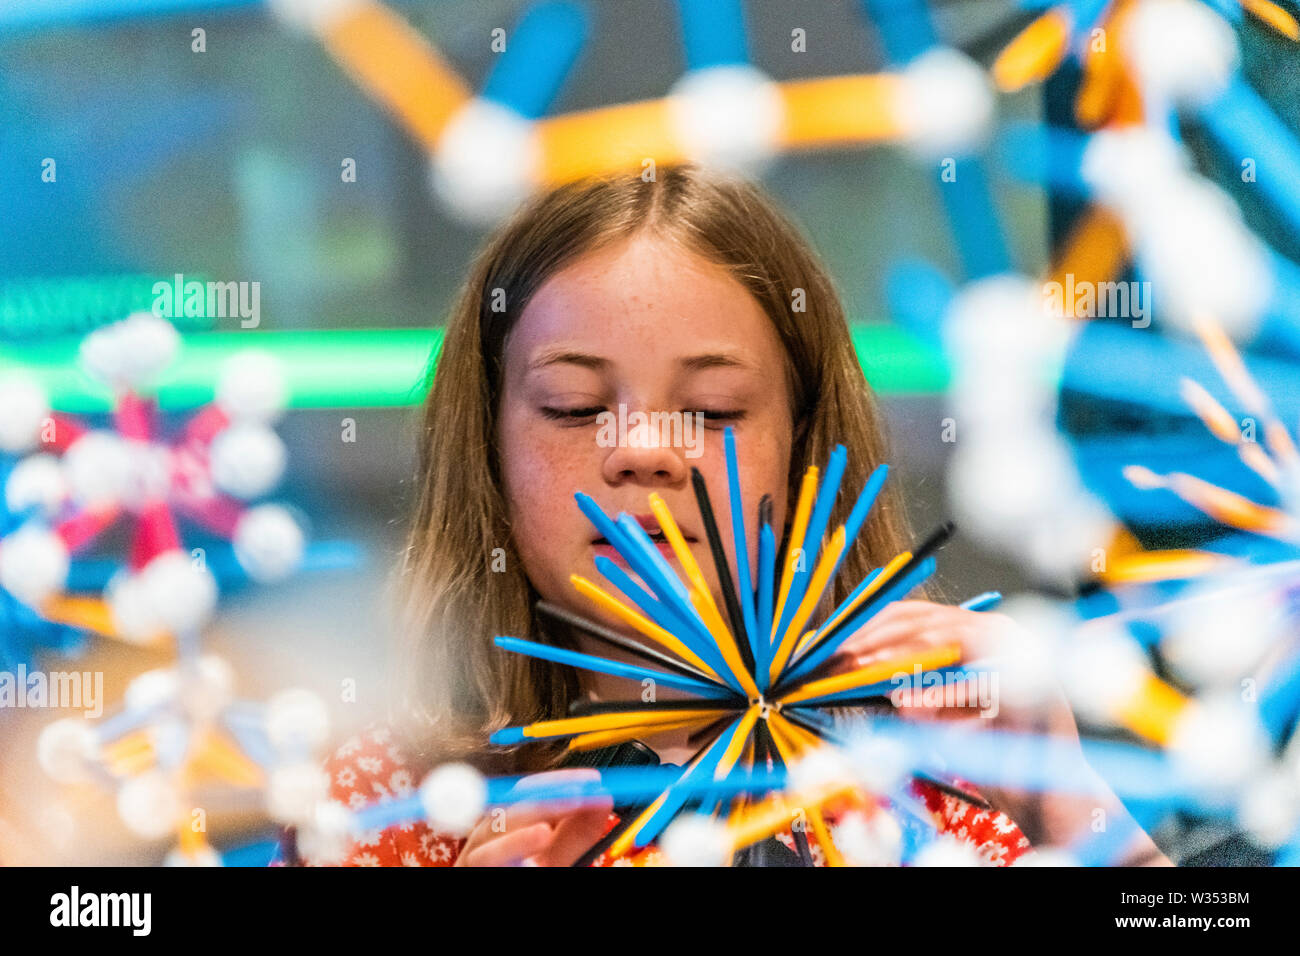 London, UK. 12th July, 2019. . 12th July, 2019. People of all ages build with specially created building pieces in The Structural Evolution Project 2001 - Olafur Eliasson: In real life at Tate Modern. Sixteen years since his sun installation in Tate Modern's Turbine Hall, In real life is a survey spanning over 30 years of Eliasson’s career. Featuring over 40 works - most of which are shown in the UK for the first time - this exhibition examines the artist’s engagement with some of today's most urgent issues, from climate change to migration. Credit: Guy Bell/Alamy Live News Credit: Guy Bell/Al Stock Photo